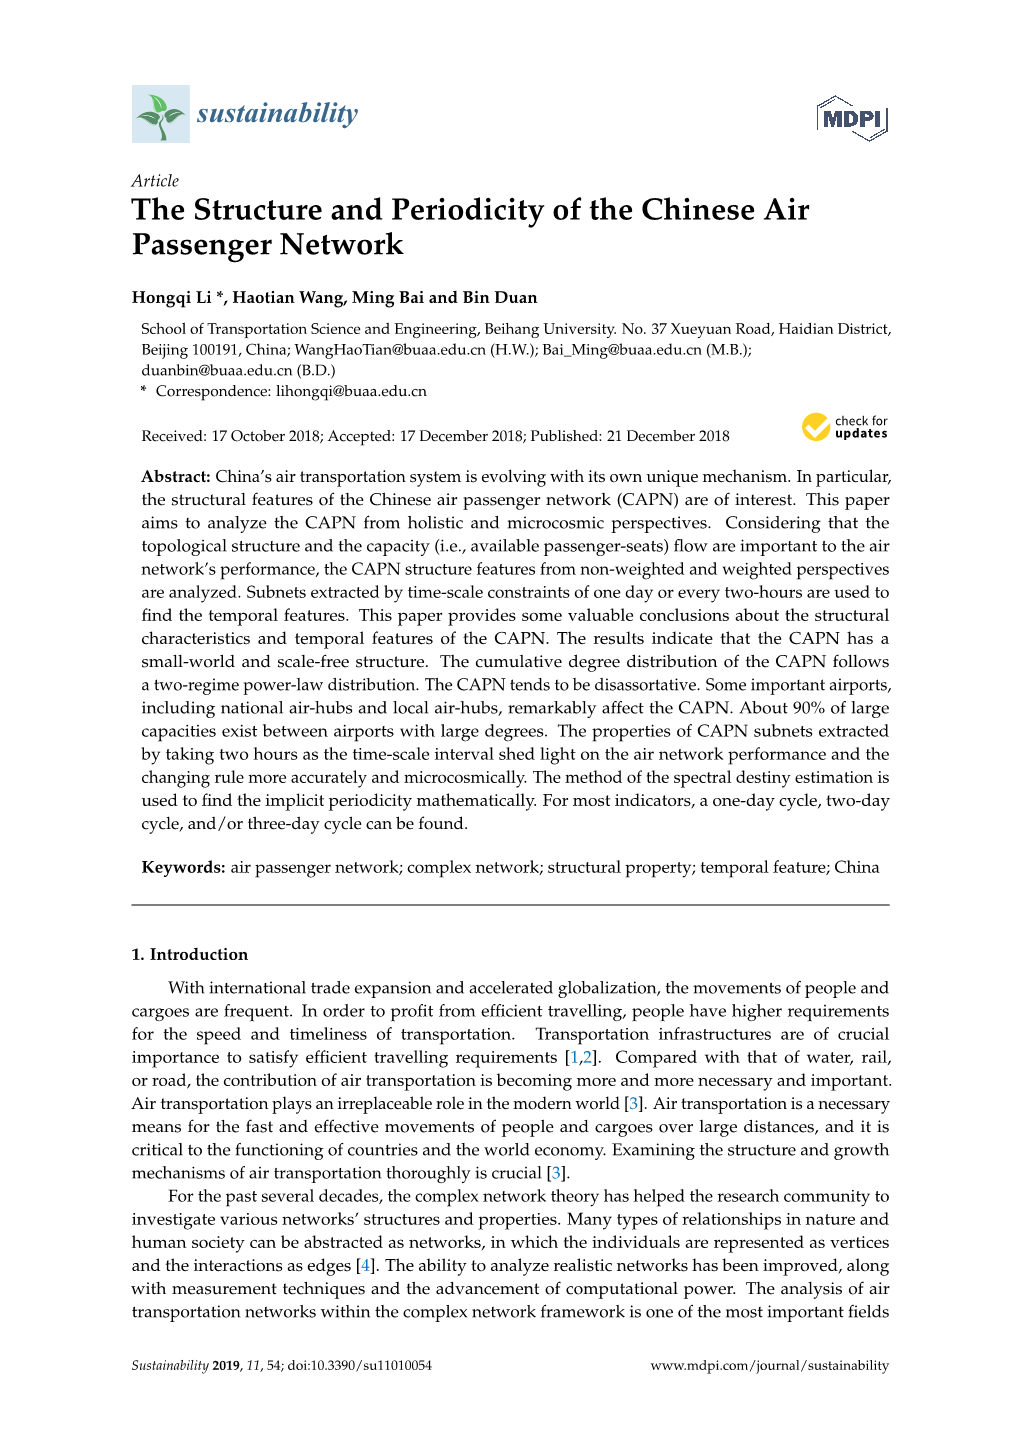 The Structure and Periodicity of the Chinese Air Passenger Network